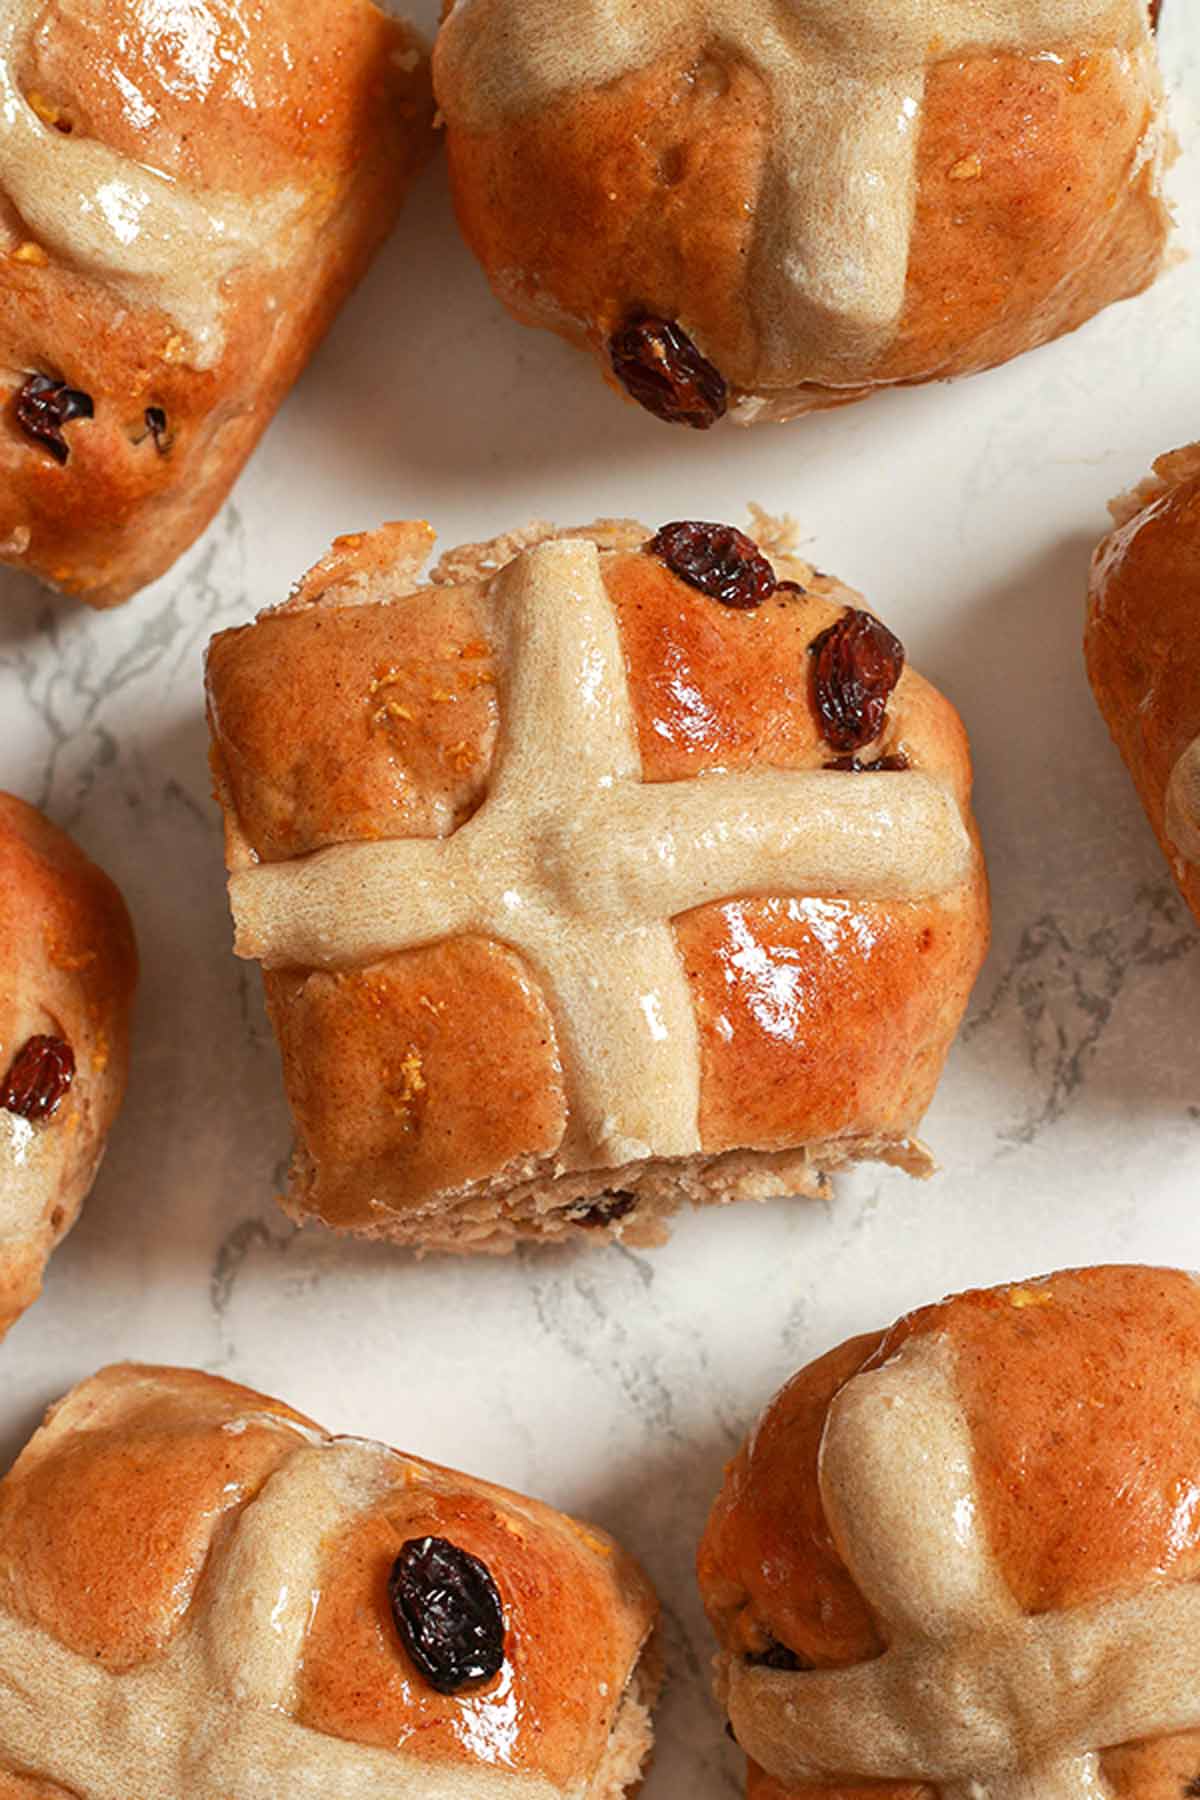 Dairy Free Hot Cross Buns Lying On A White Surface